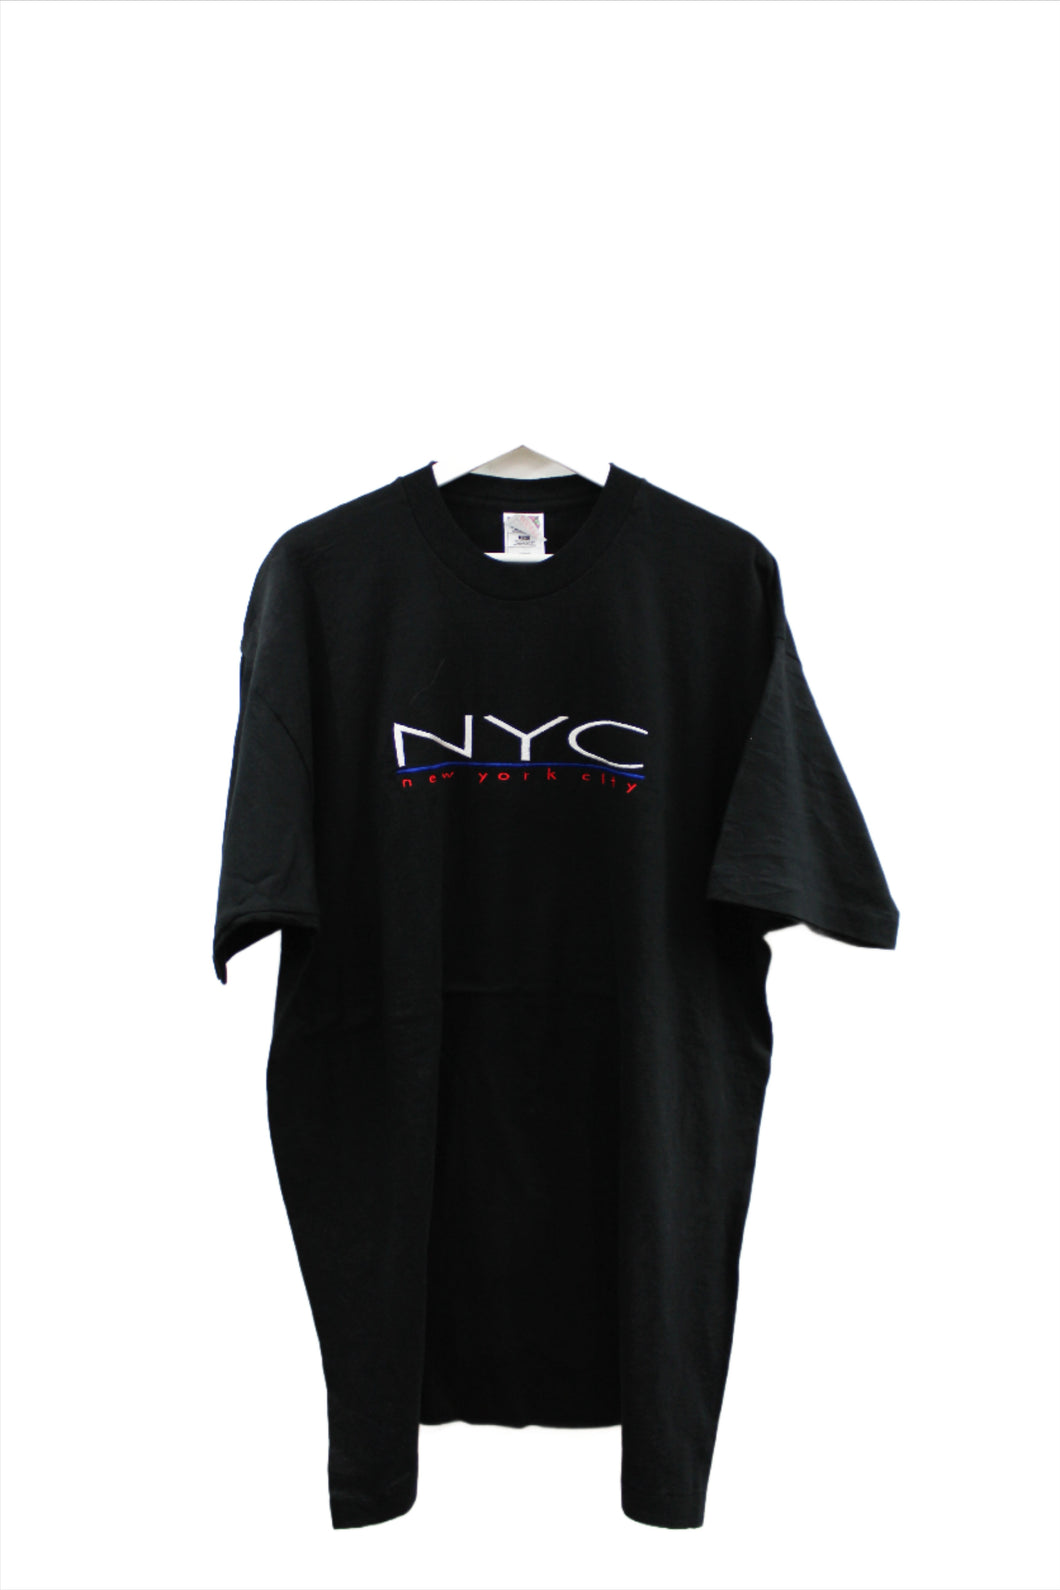 X - Vintage New York City Embroidered Script Tee